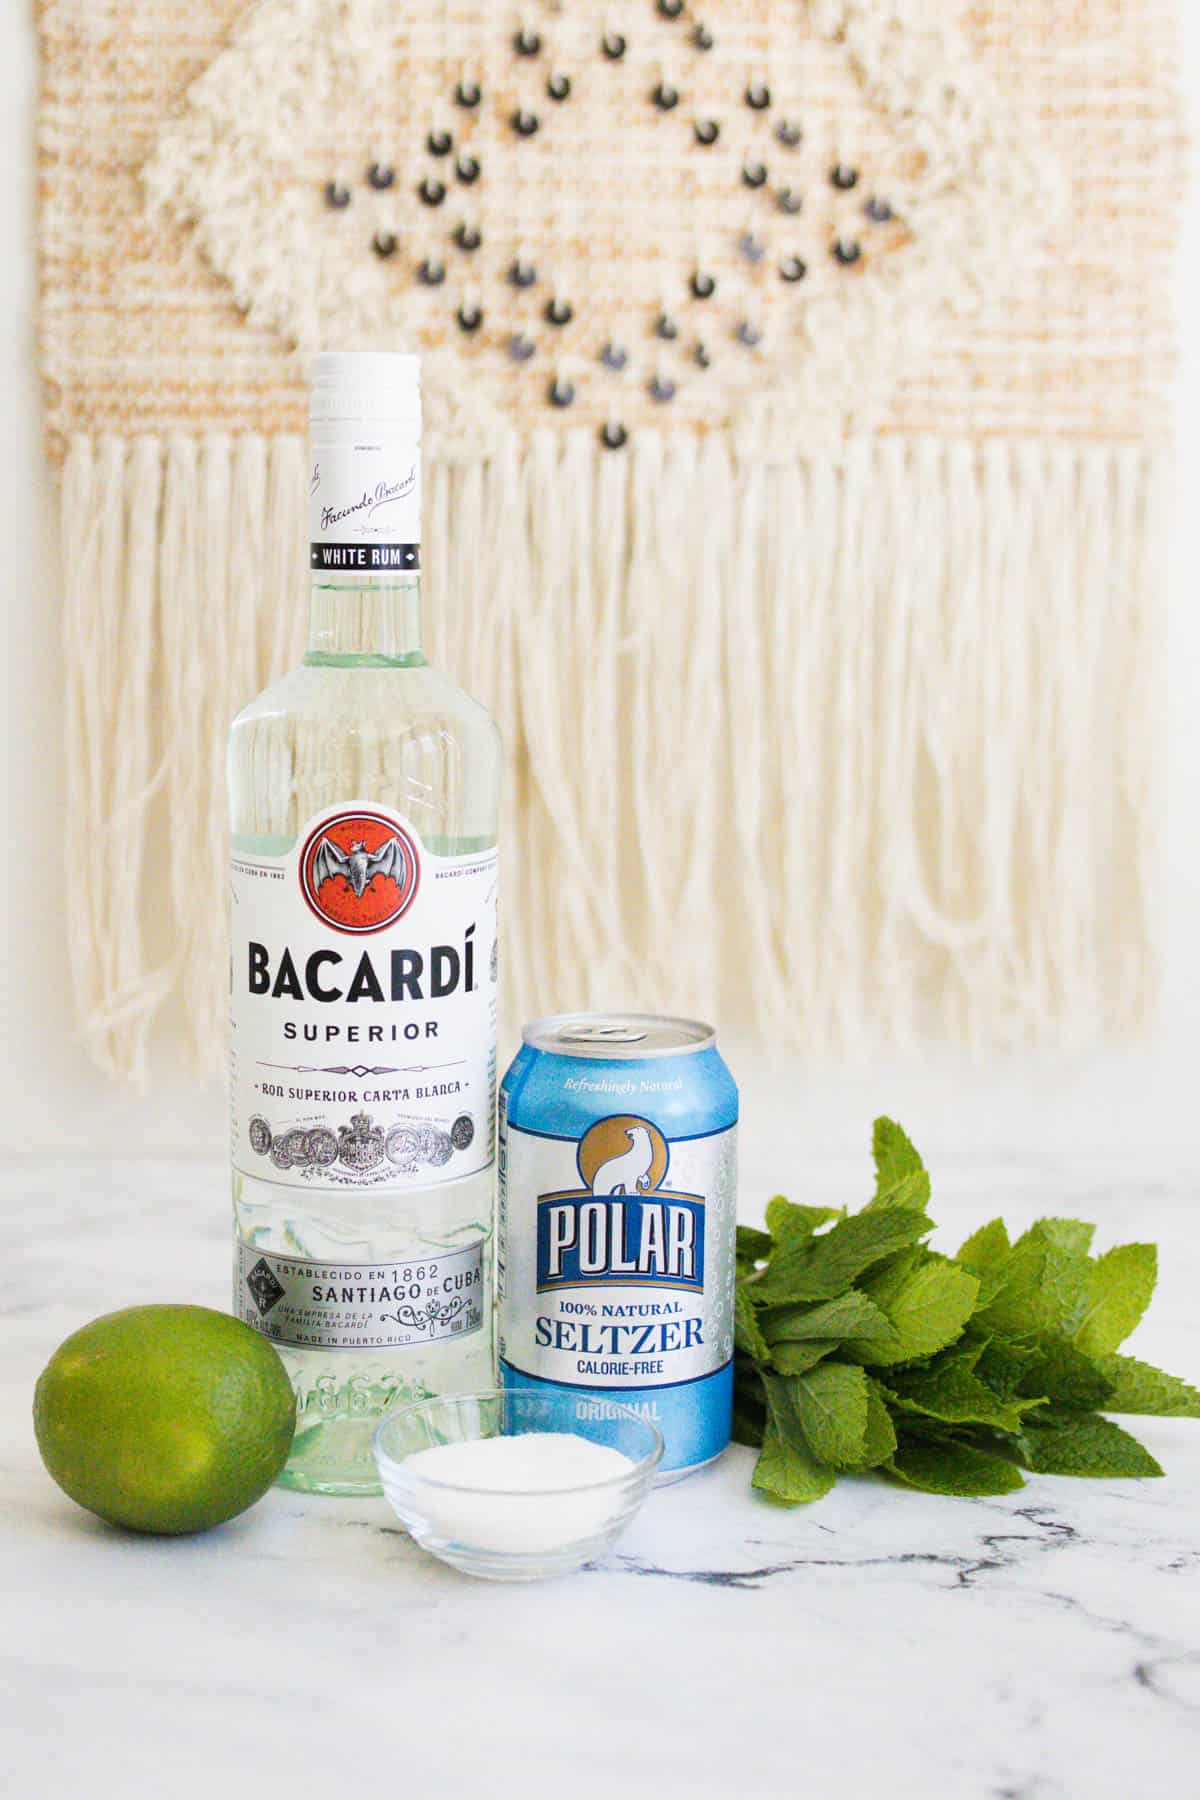 Classic mojito ingredients on a marble countertop.